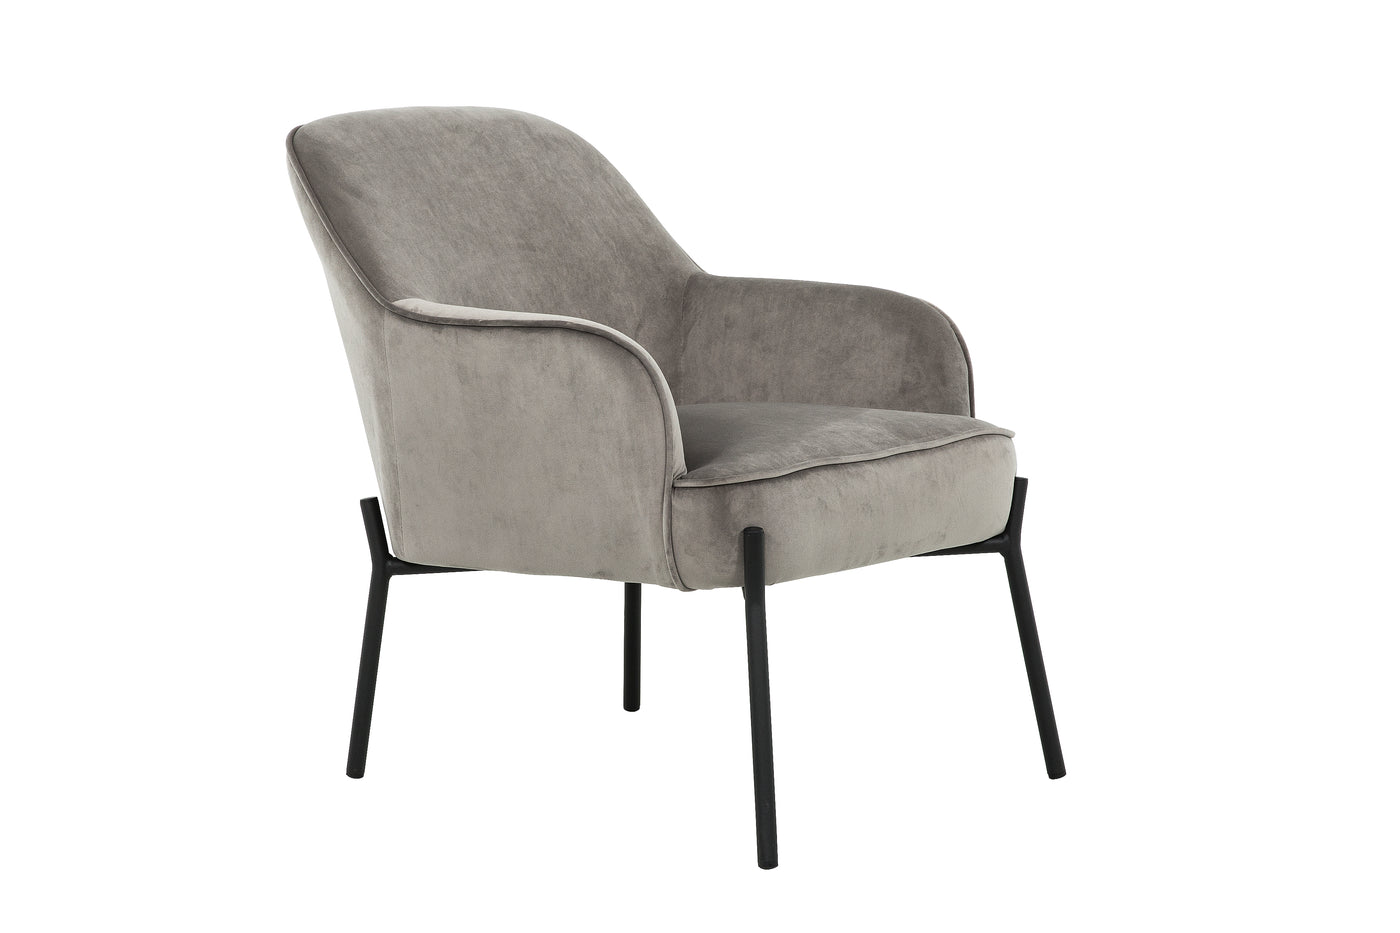 Morley Accent Chair - Slate